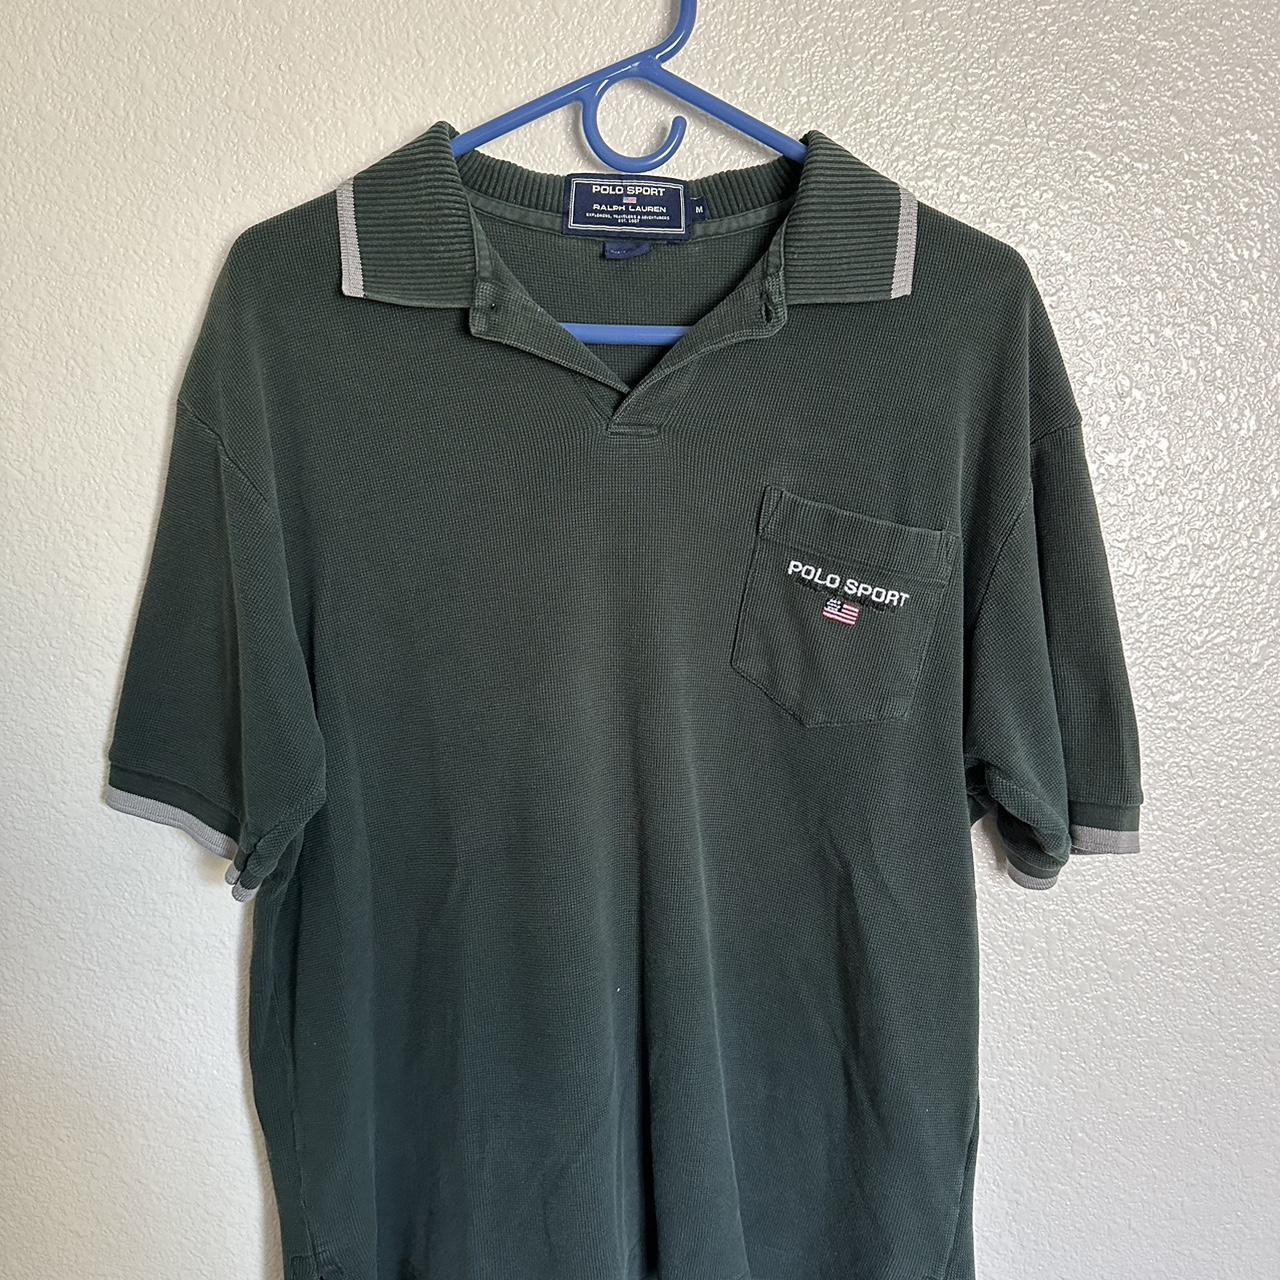 San Antonio Spurs Shirt 2000s vintage polo, relaxed - Depop